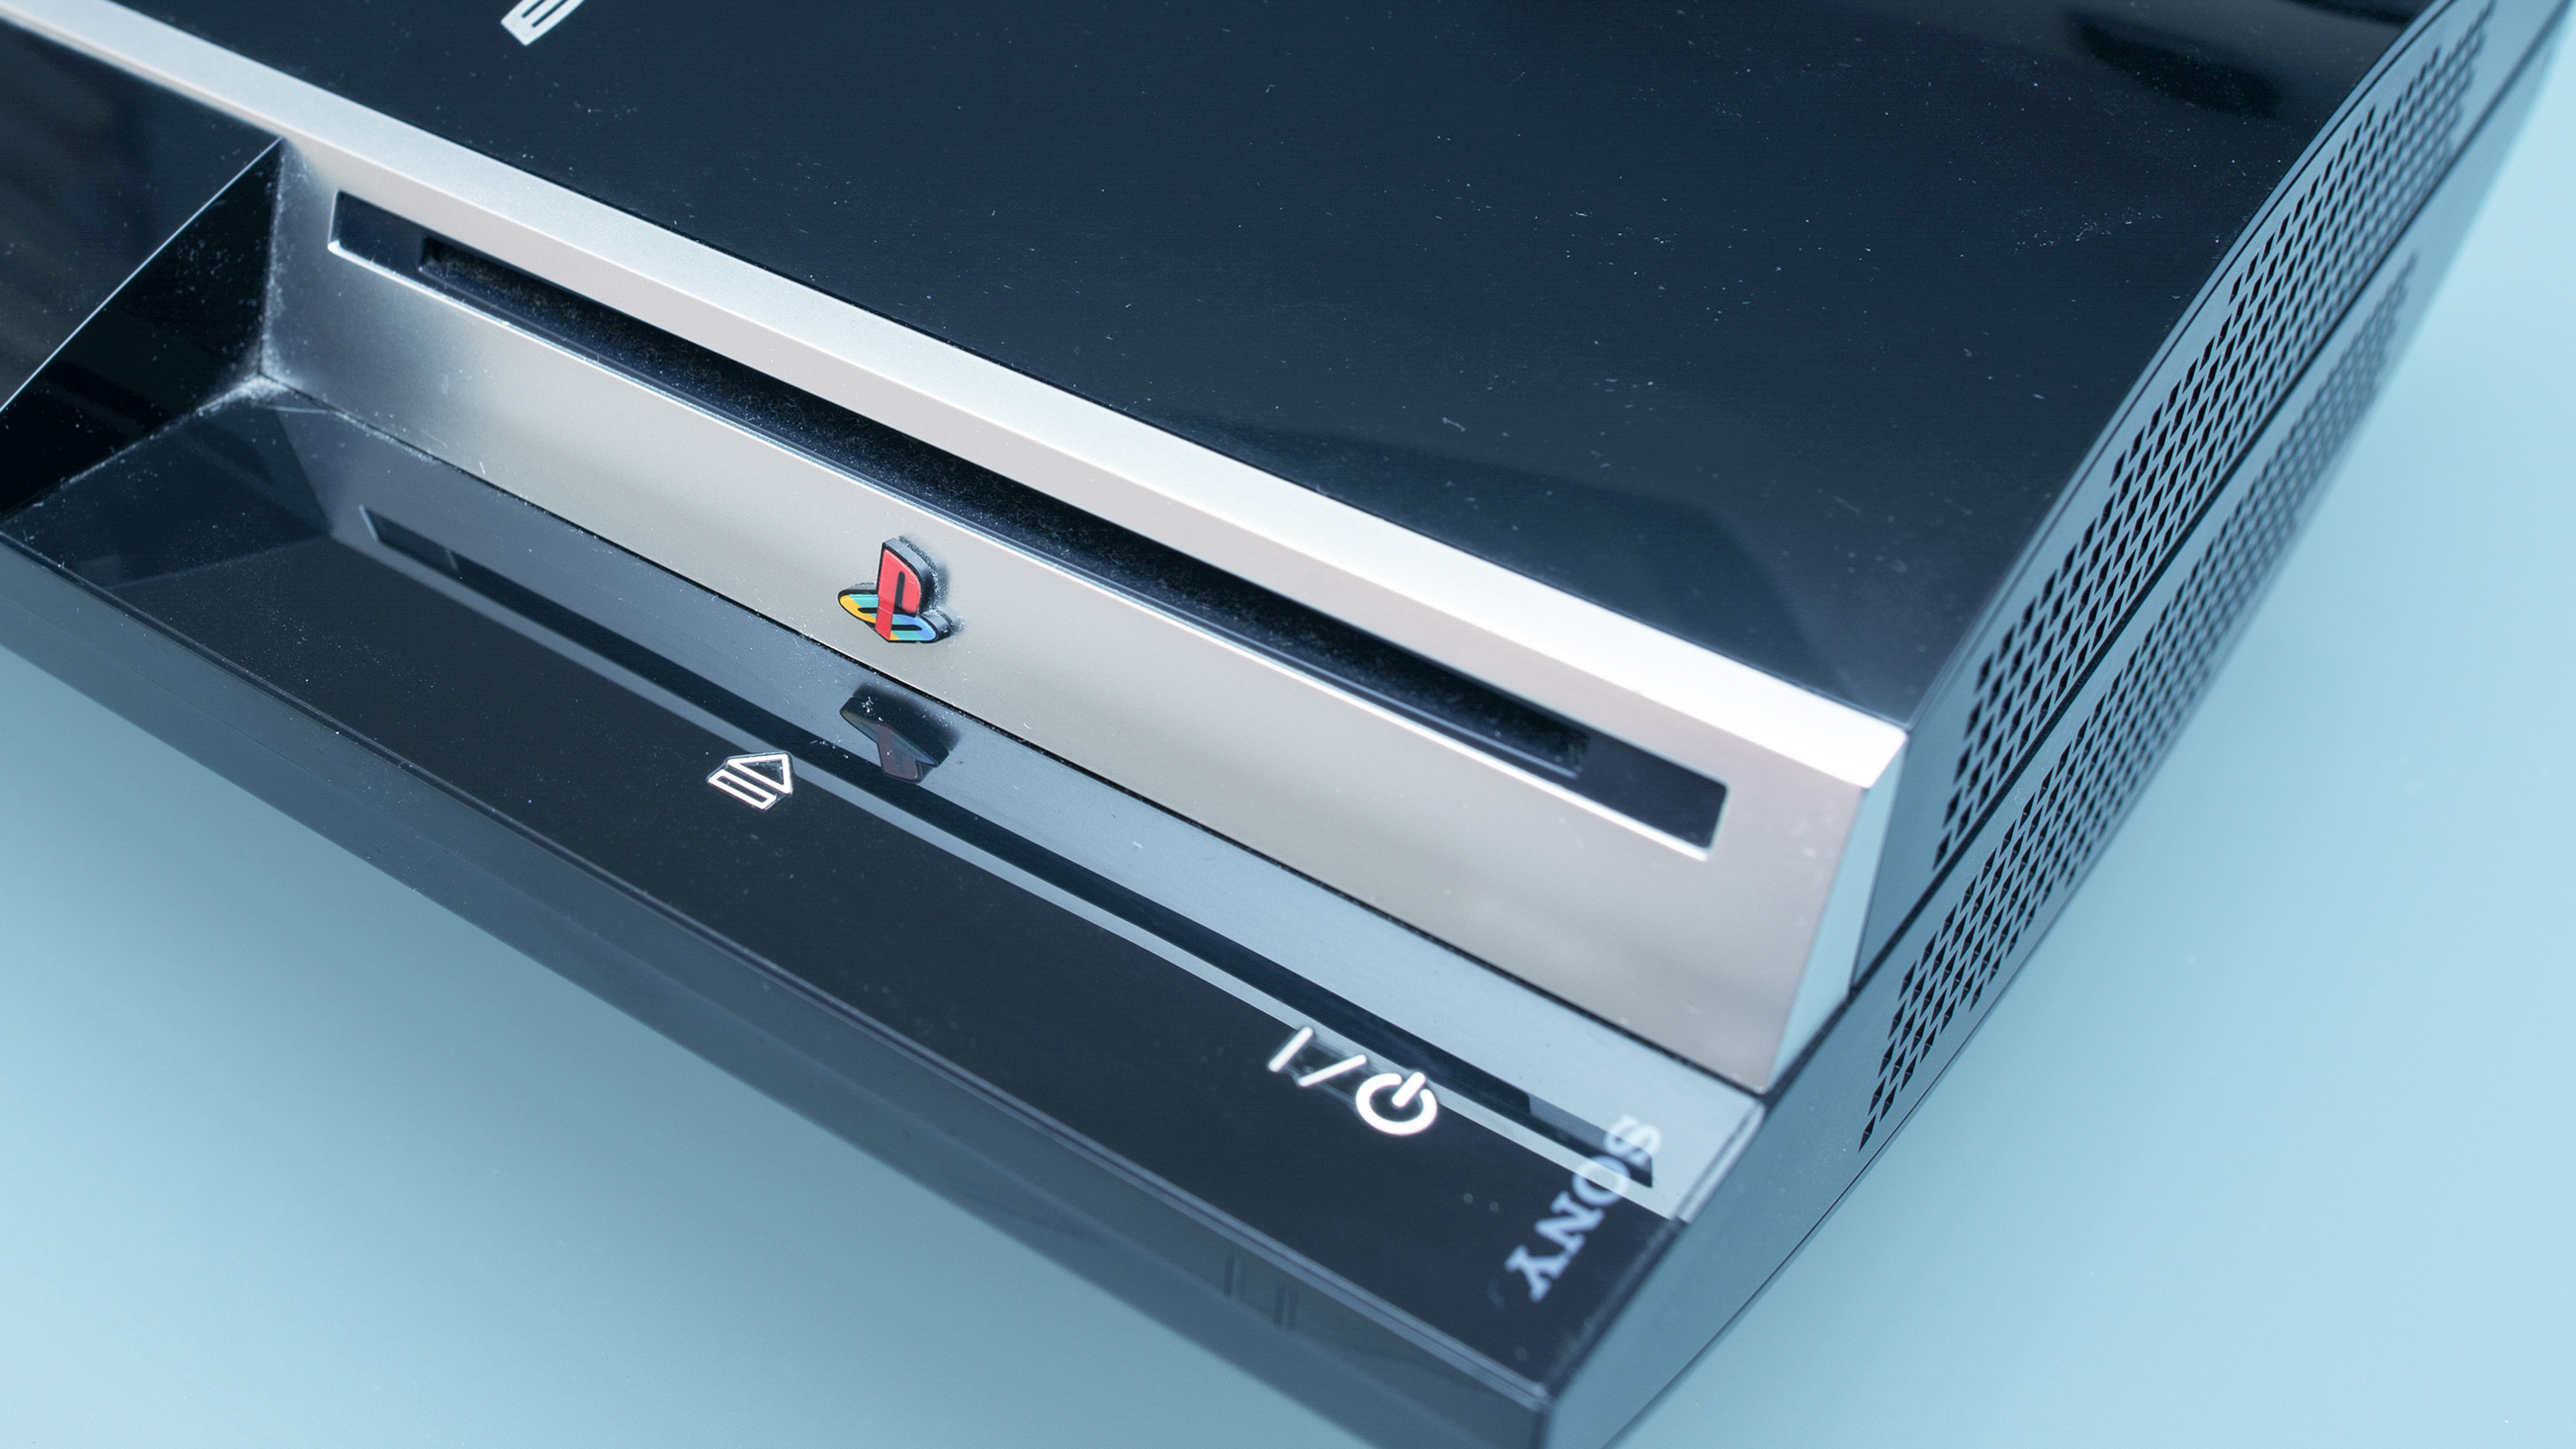 Sony to shut down PlayStation Store support for PS3, PSP in July